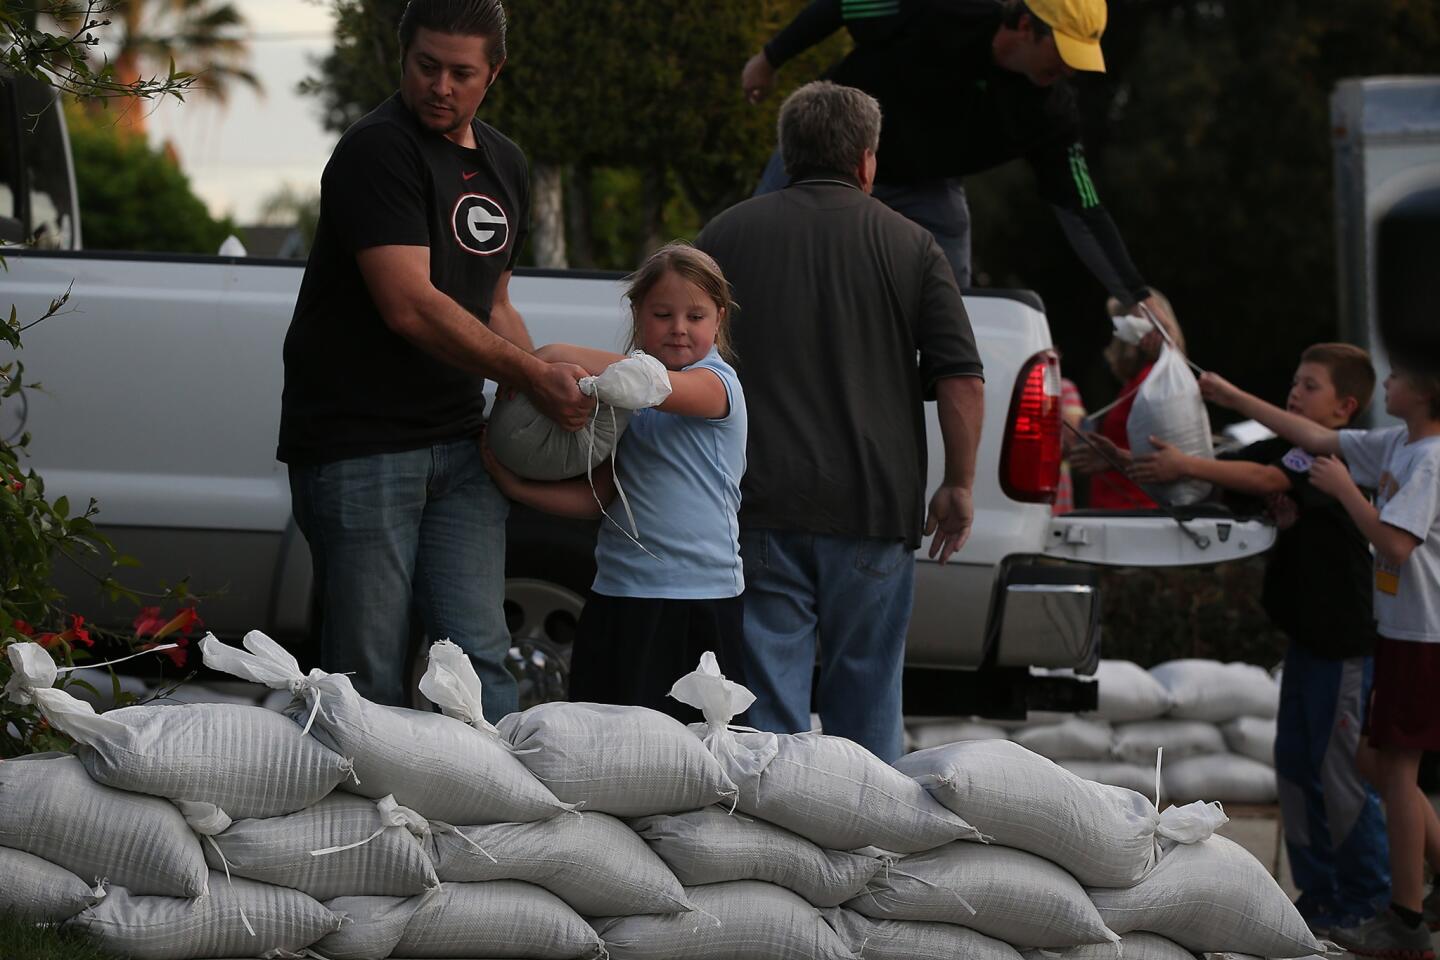 Glendora residents Ryan Dickey and his daughter, Jenna, 7, place sandbags outside a home on Loraine Avenue to help protect it against possible flooding near the site of January's Colby fire.